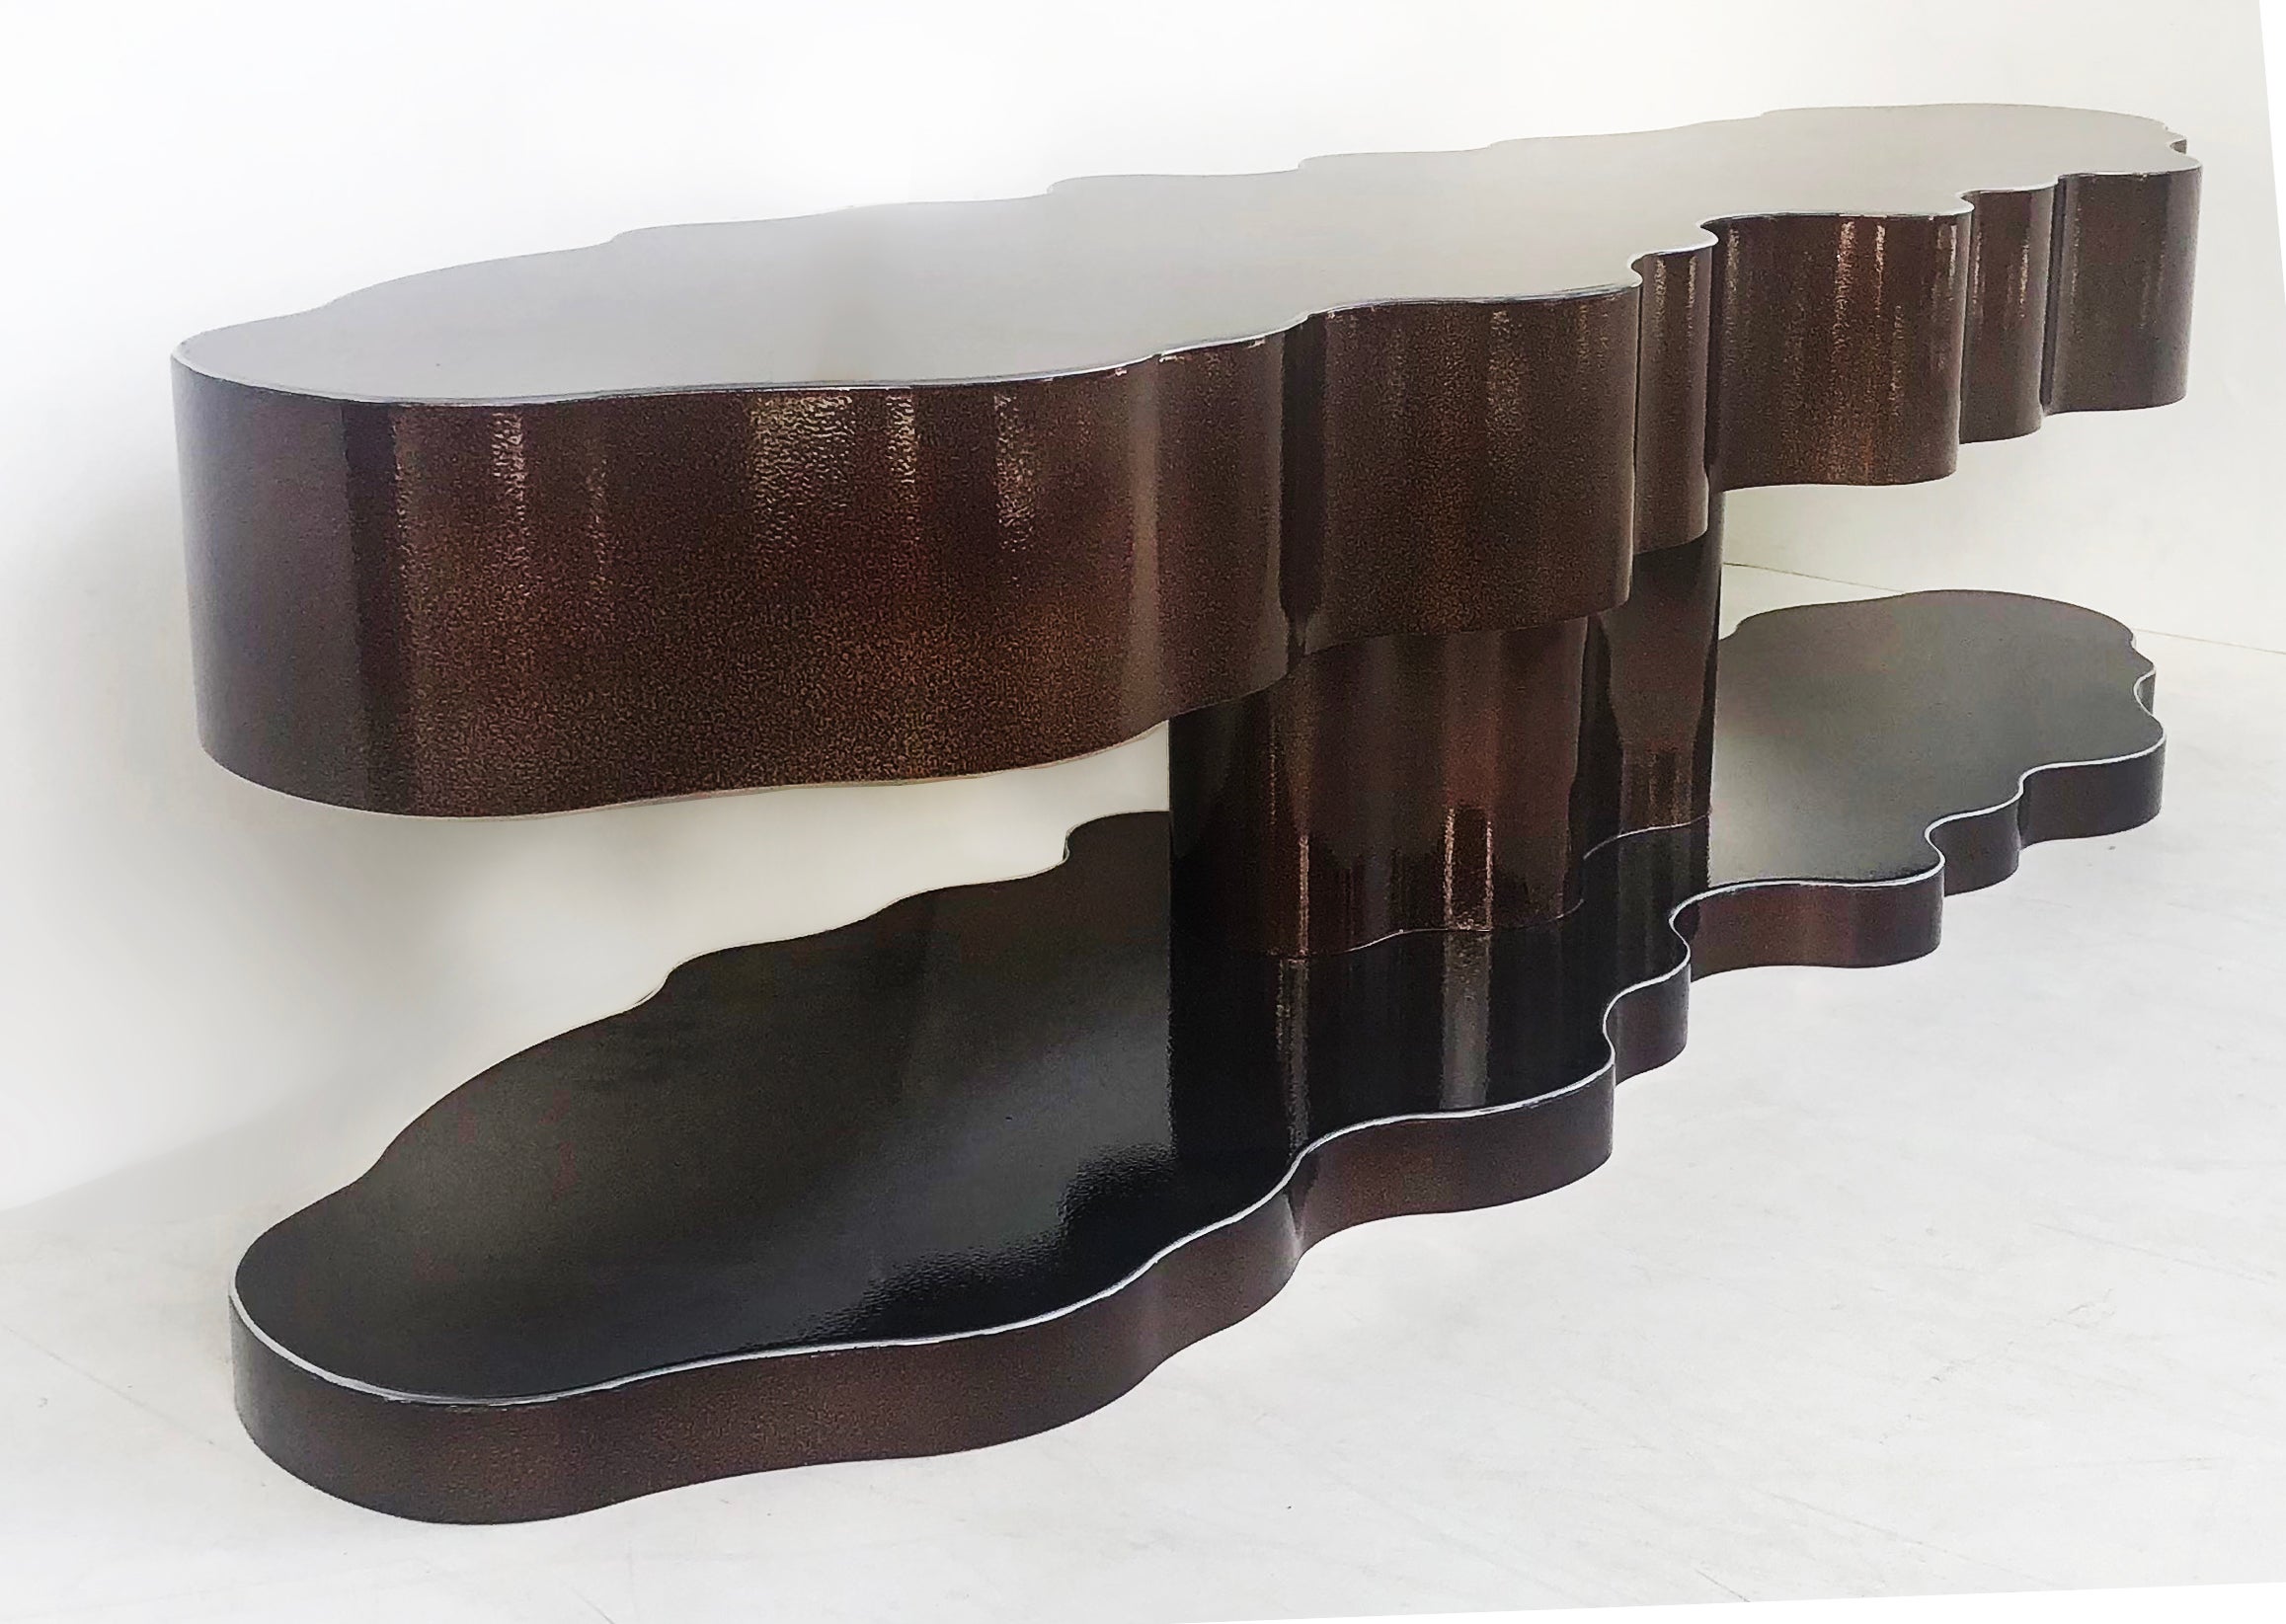 Bert Furnari Abstract Sculptural Coffee Table, Aluminum Powder-Coated Finish

Offered for sale is a one-of-a-kind Bert Funari sculptural aluminum coffee table with a powder-coated finish. Made of aluminum that is hand-cut and curved to achieve